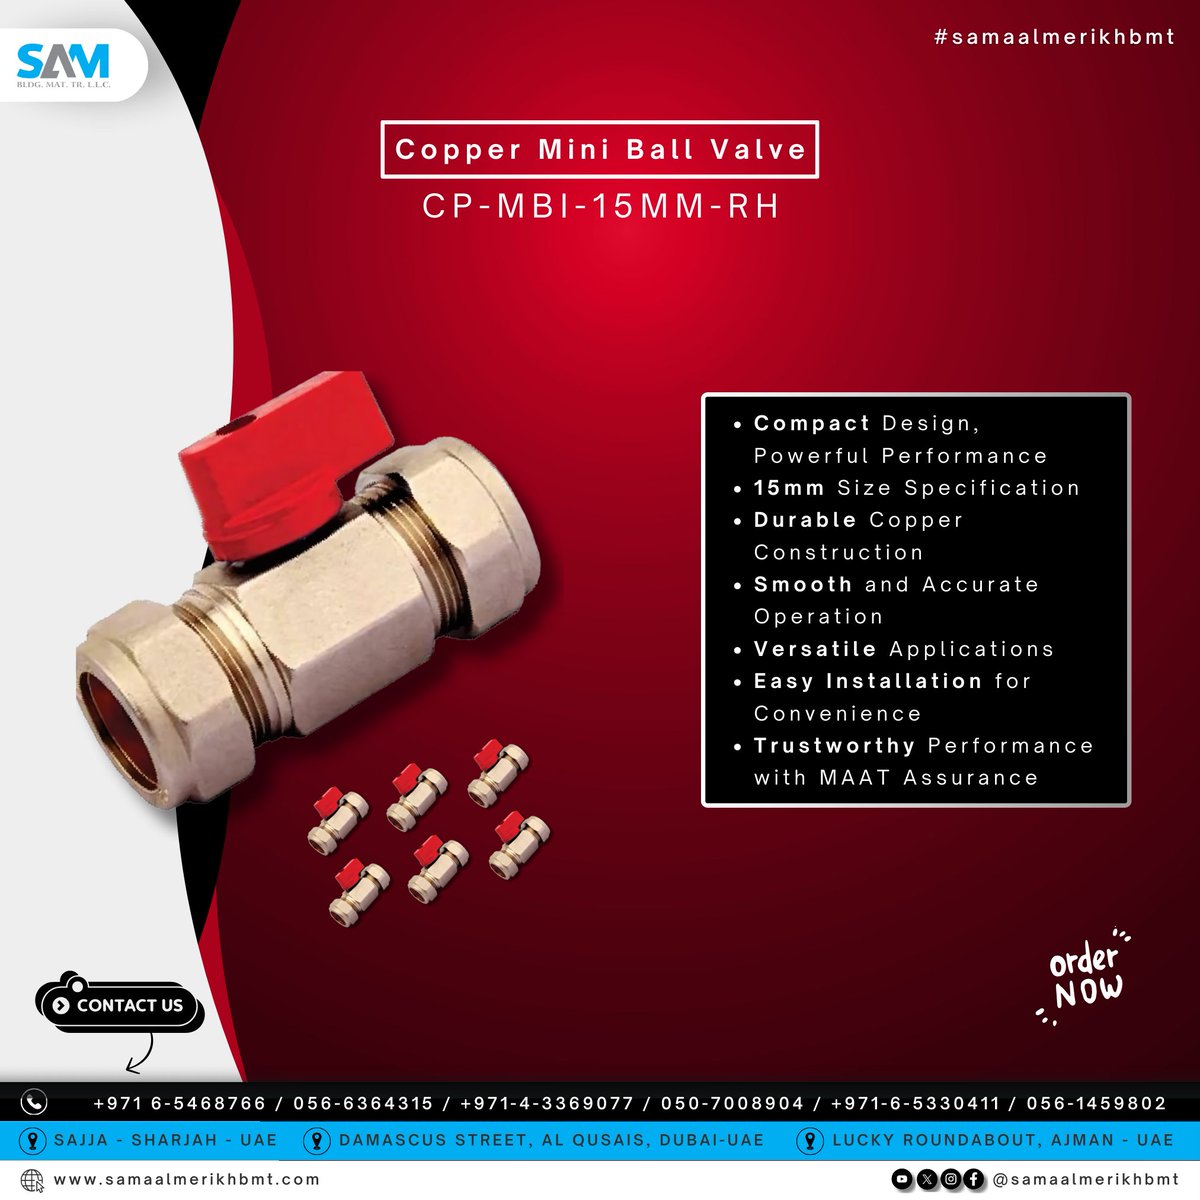 Upgrade your fluid control systems with the precision and reliability of MAAT Copper Mini Ball Valve.  #fluidcontrol #ballvalve #precisionengineering #copperconstruction #MAAT #versatileapplications #easyinstallation #reliableperformance